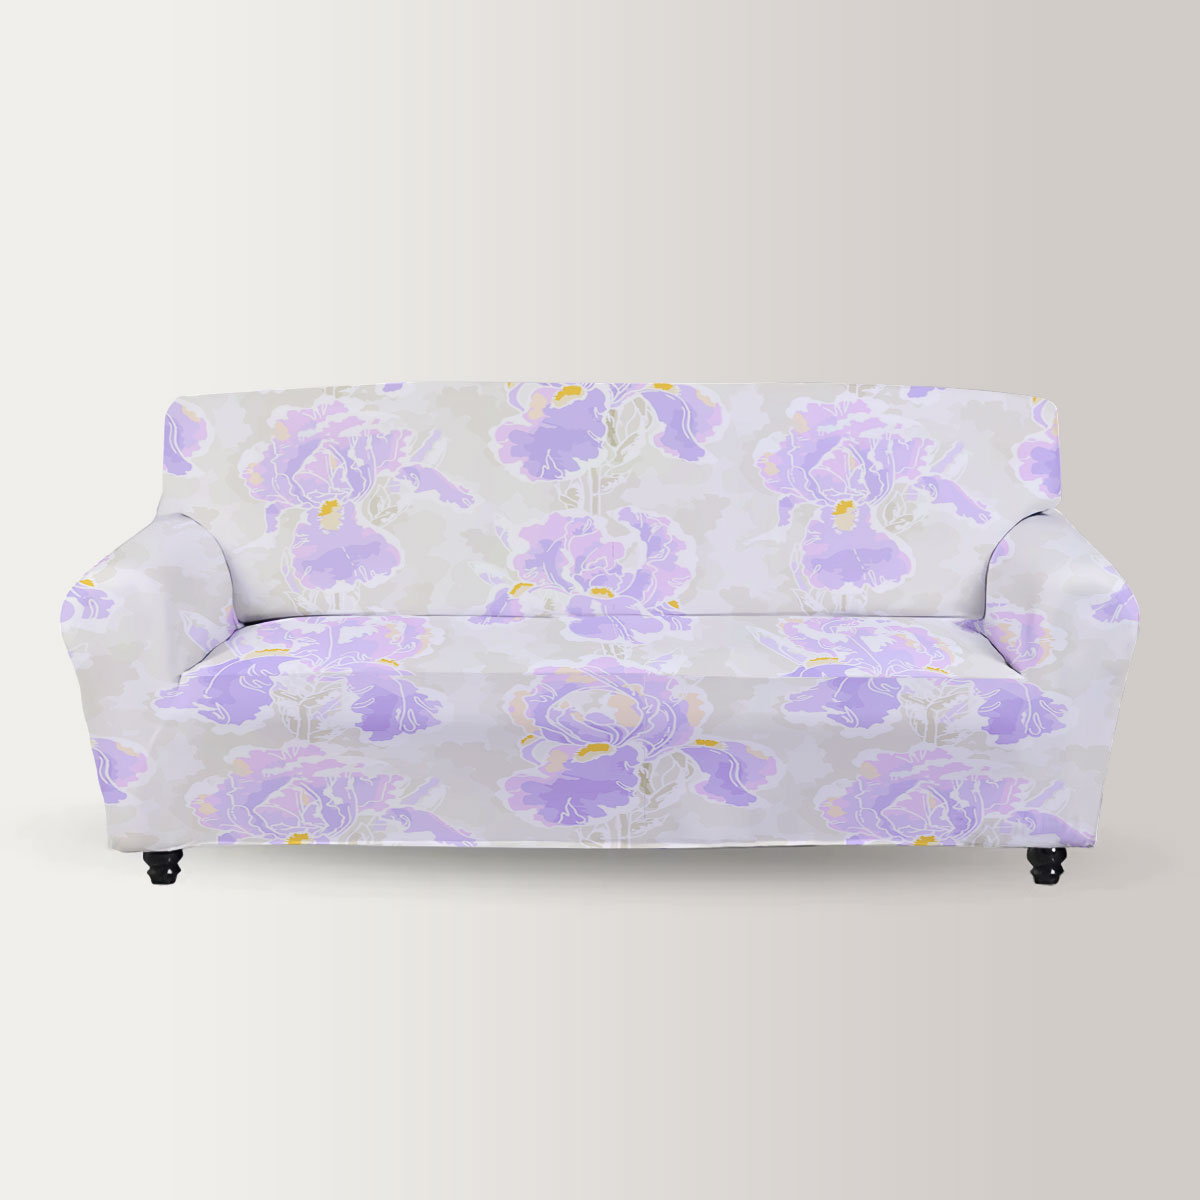 Abstract Iris Flower Sofa Cover